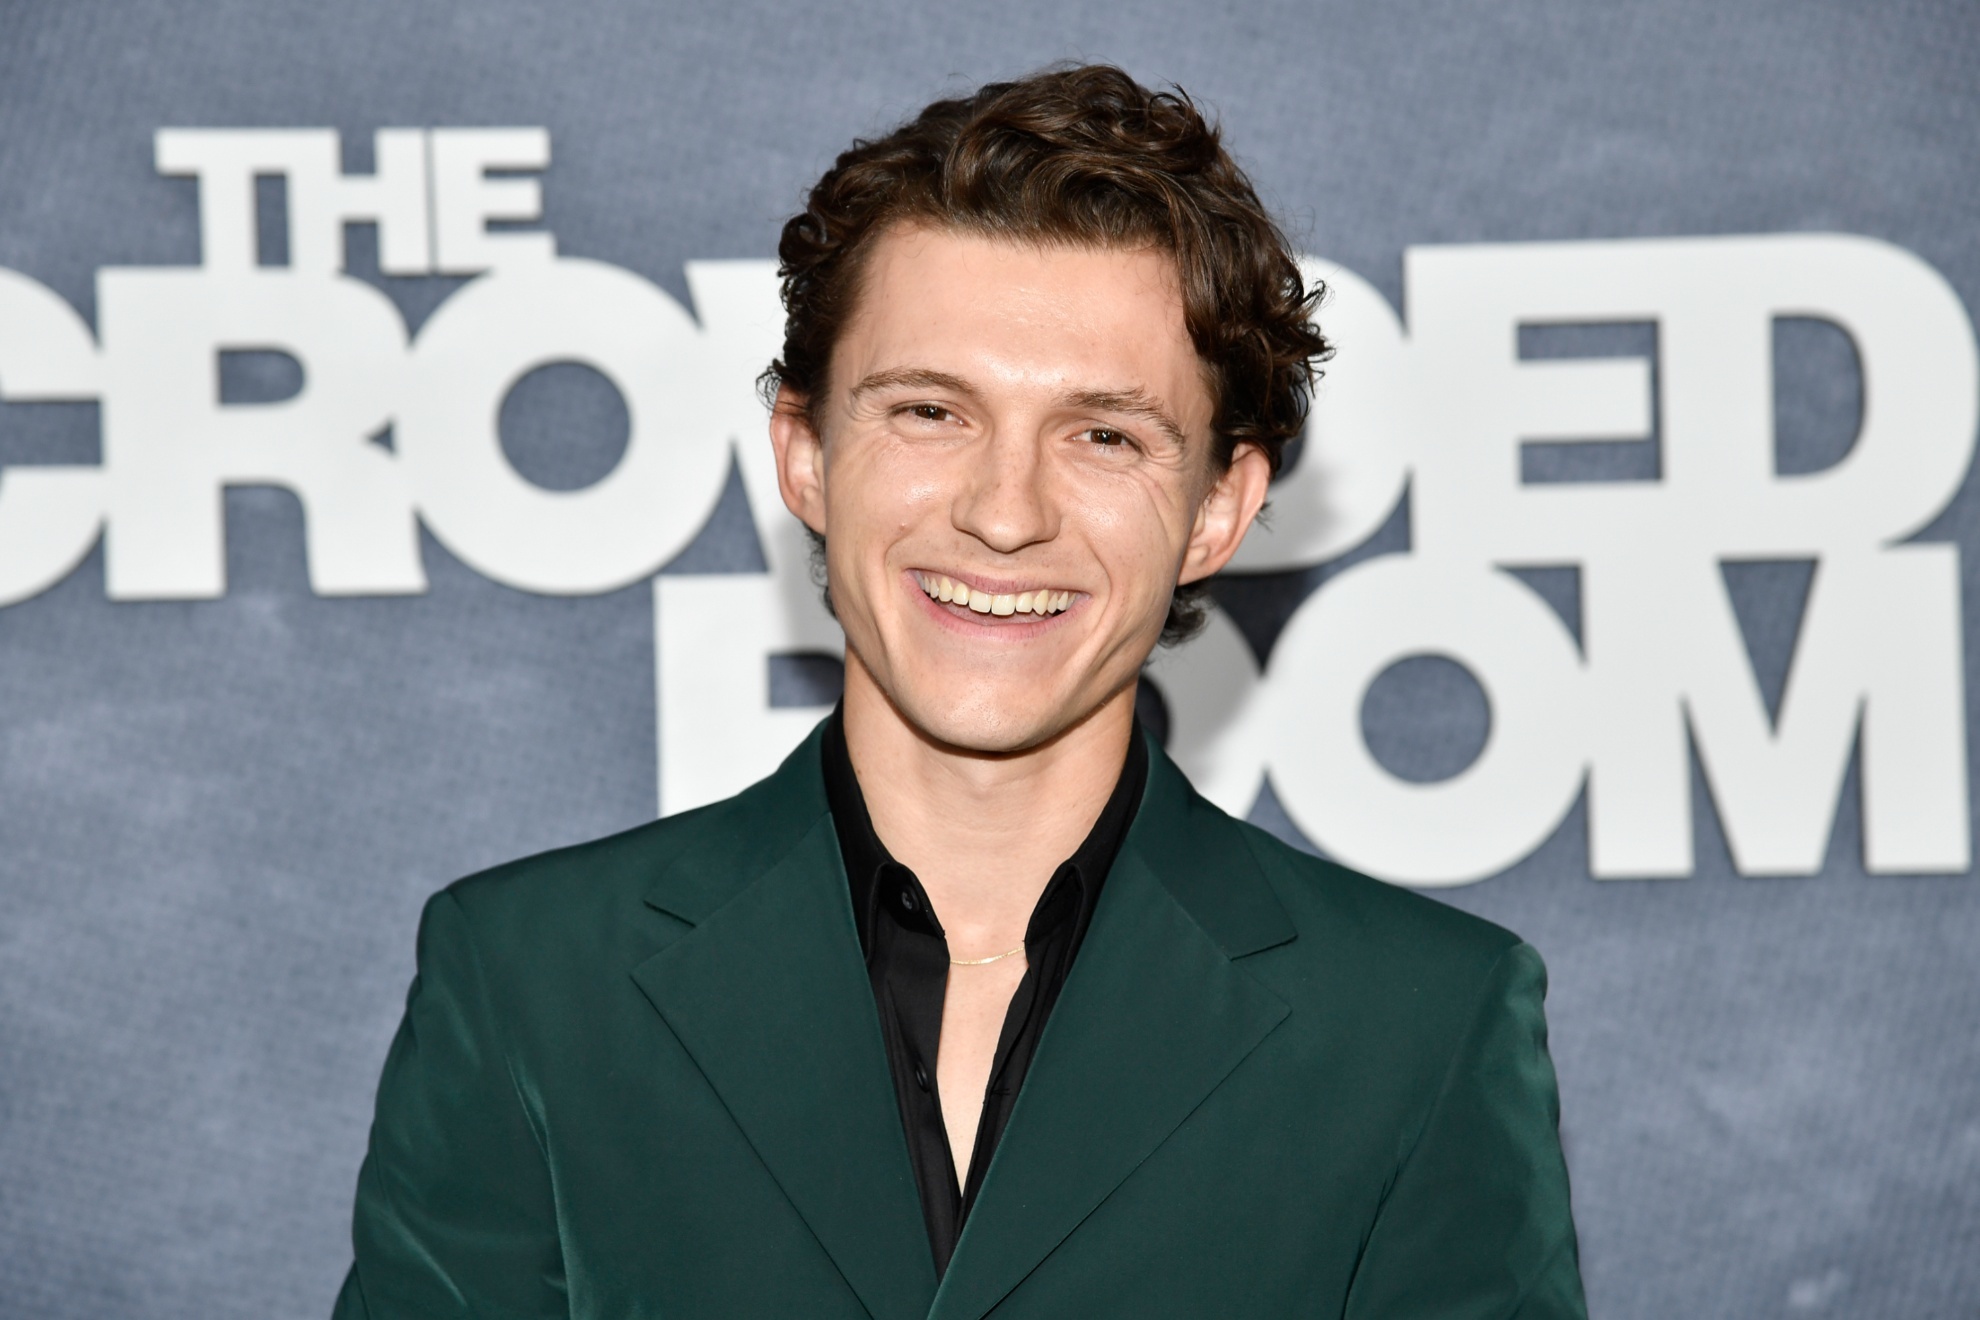 Tom Holland star in the new Apple+ series The Crowded Room